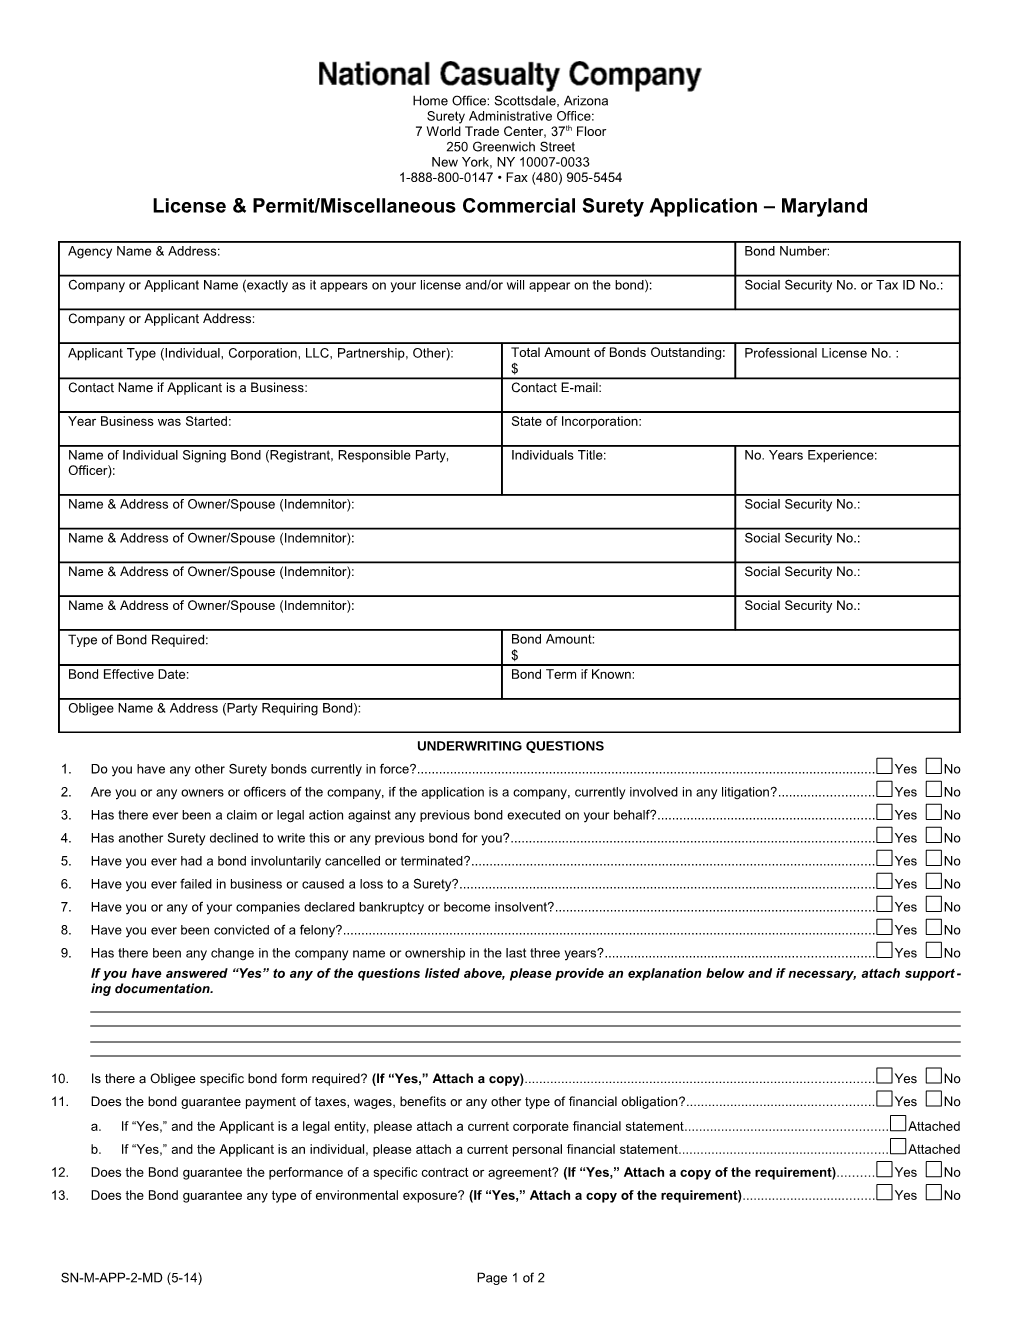 License & Permit/Miscellaneous Commercial Surety Application